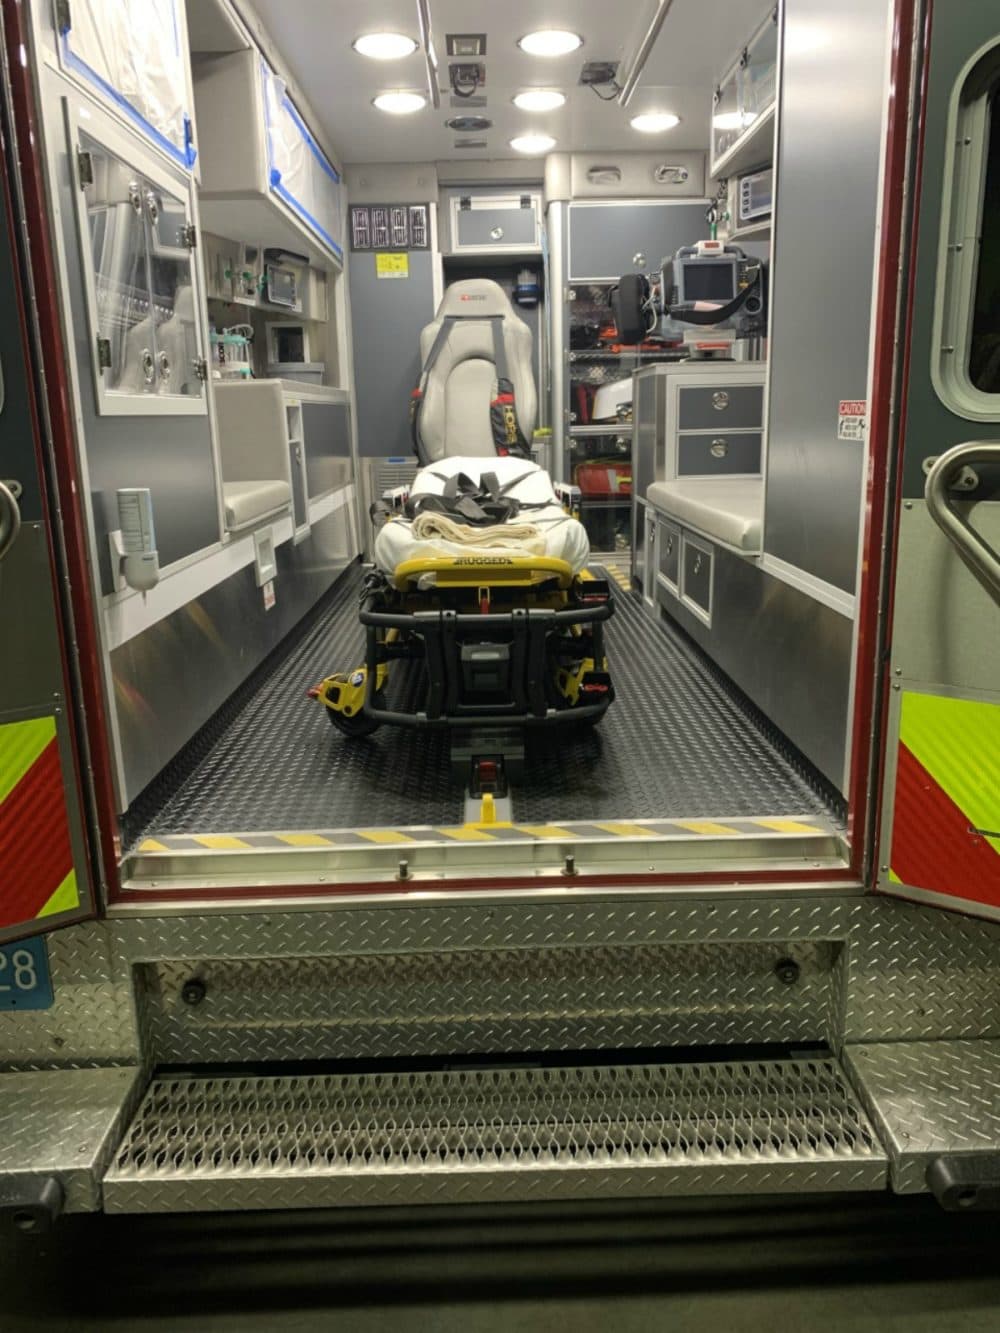 Ted's ambulance airs out after sanitizing. The first call of the day, which came in about three hours before this photo was taken, was for a patient with known COVID-19 who was found sleeping in a local park. (Courtesy)